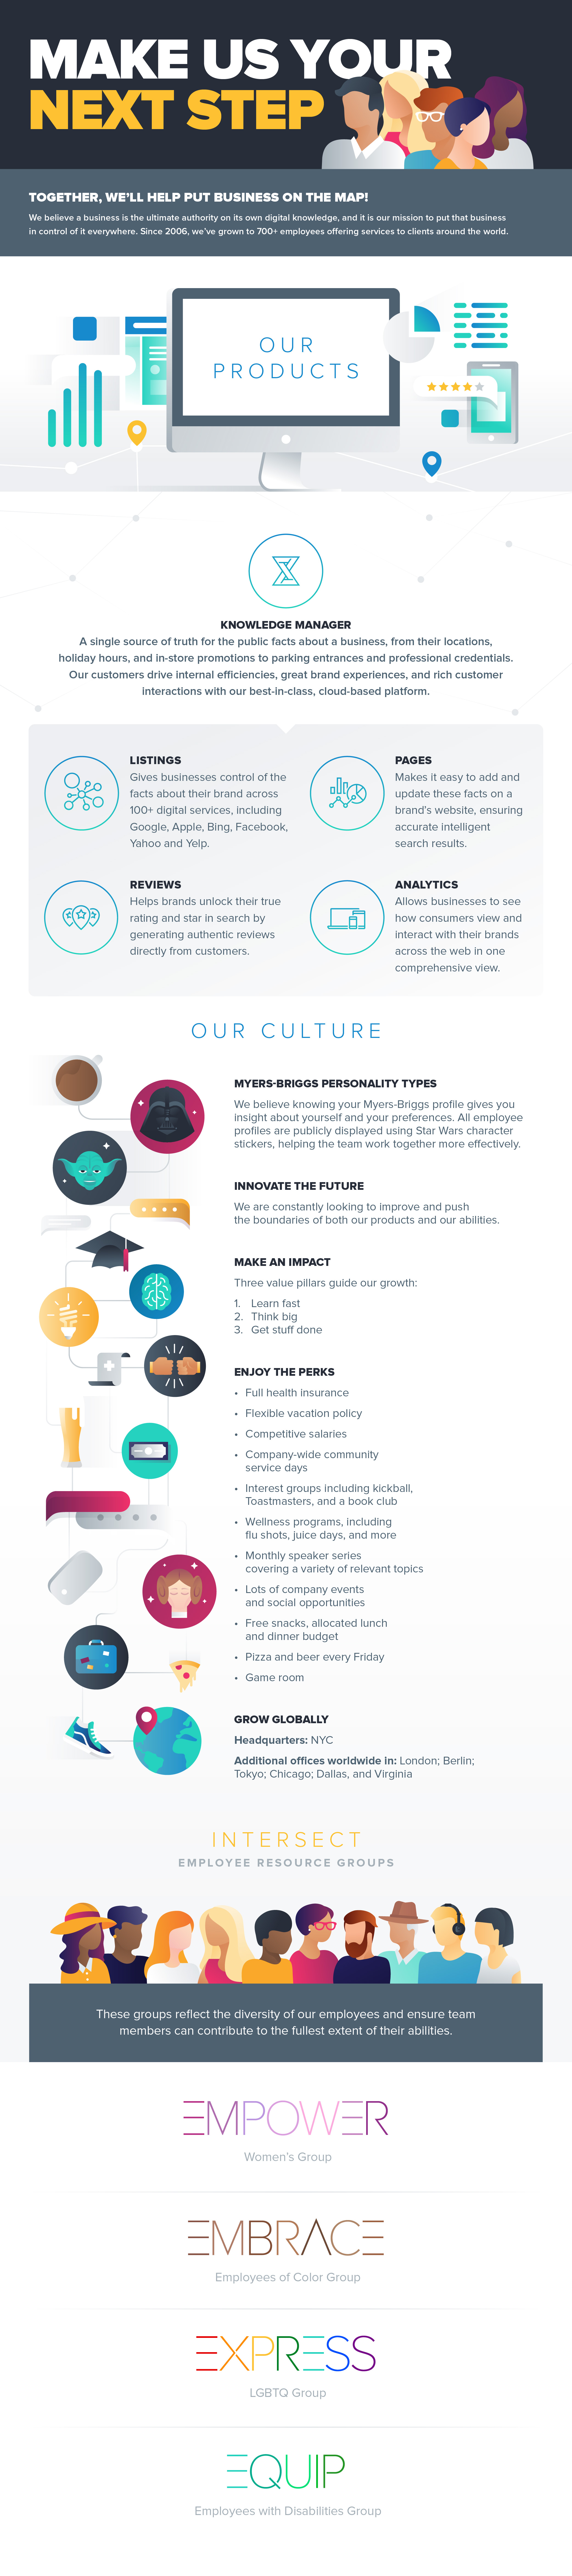 Make Us Your Next Step Recruitment Infographic